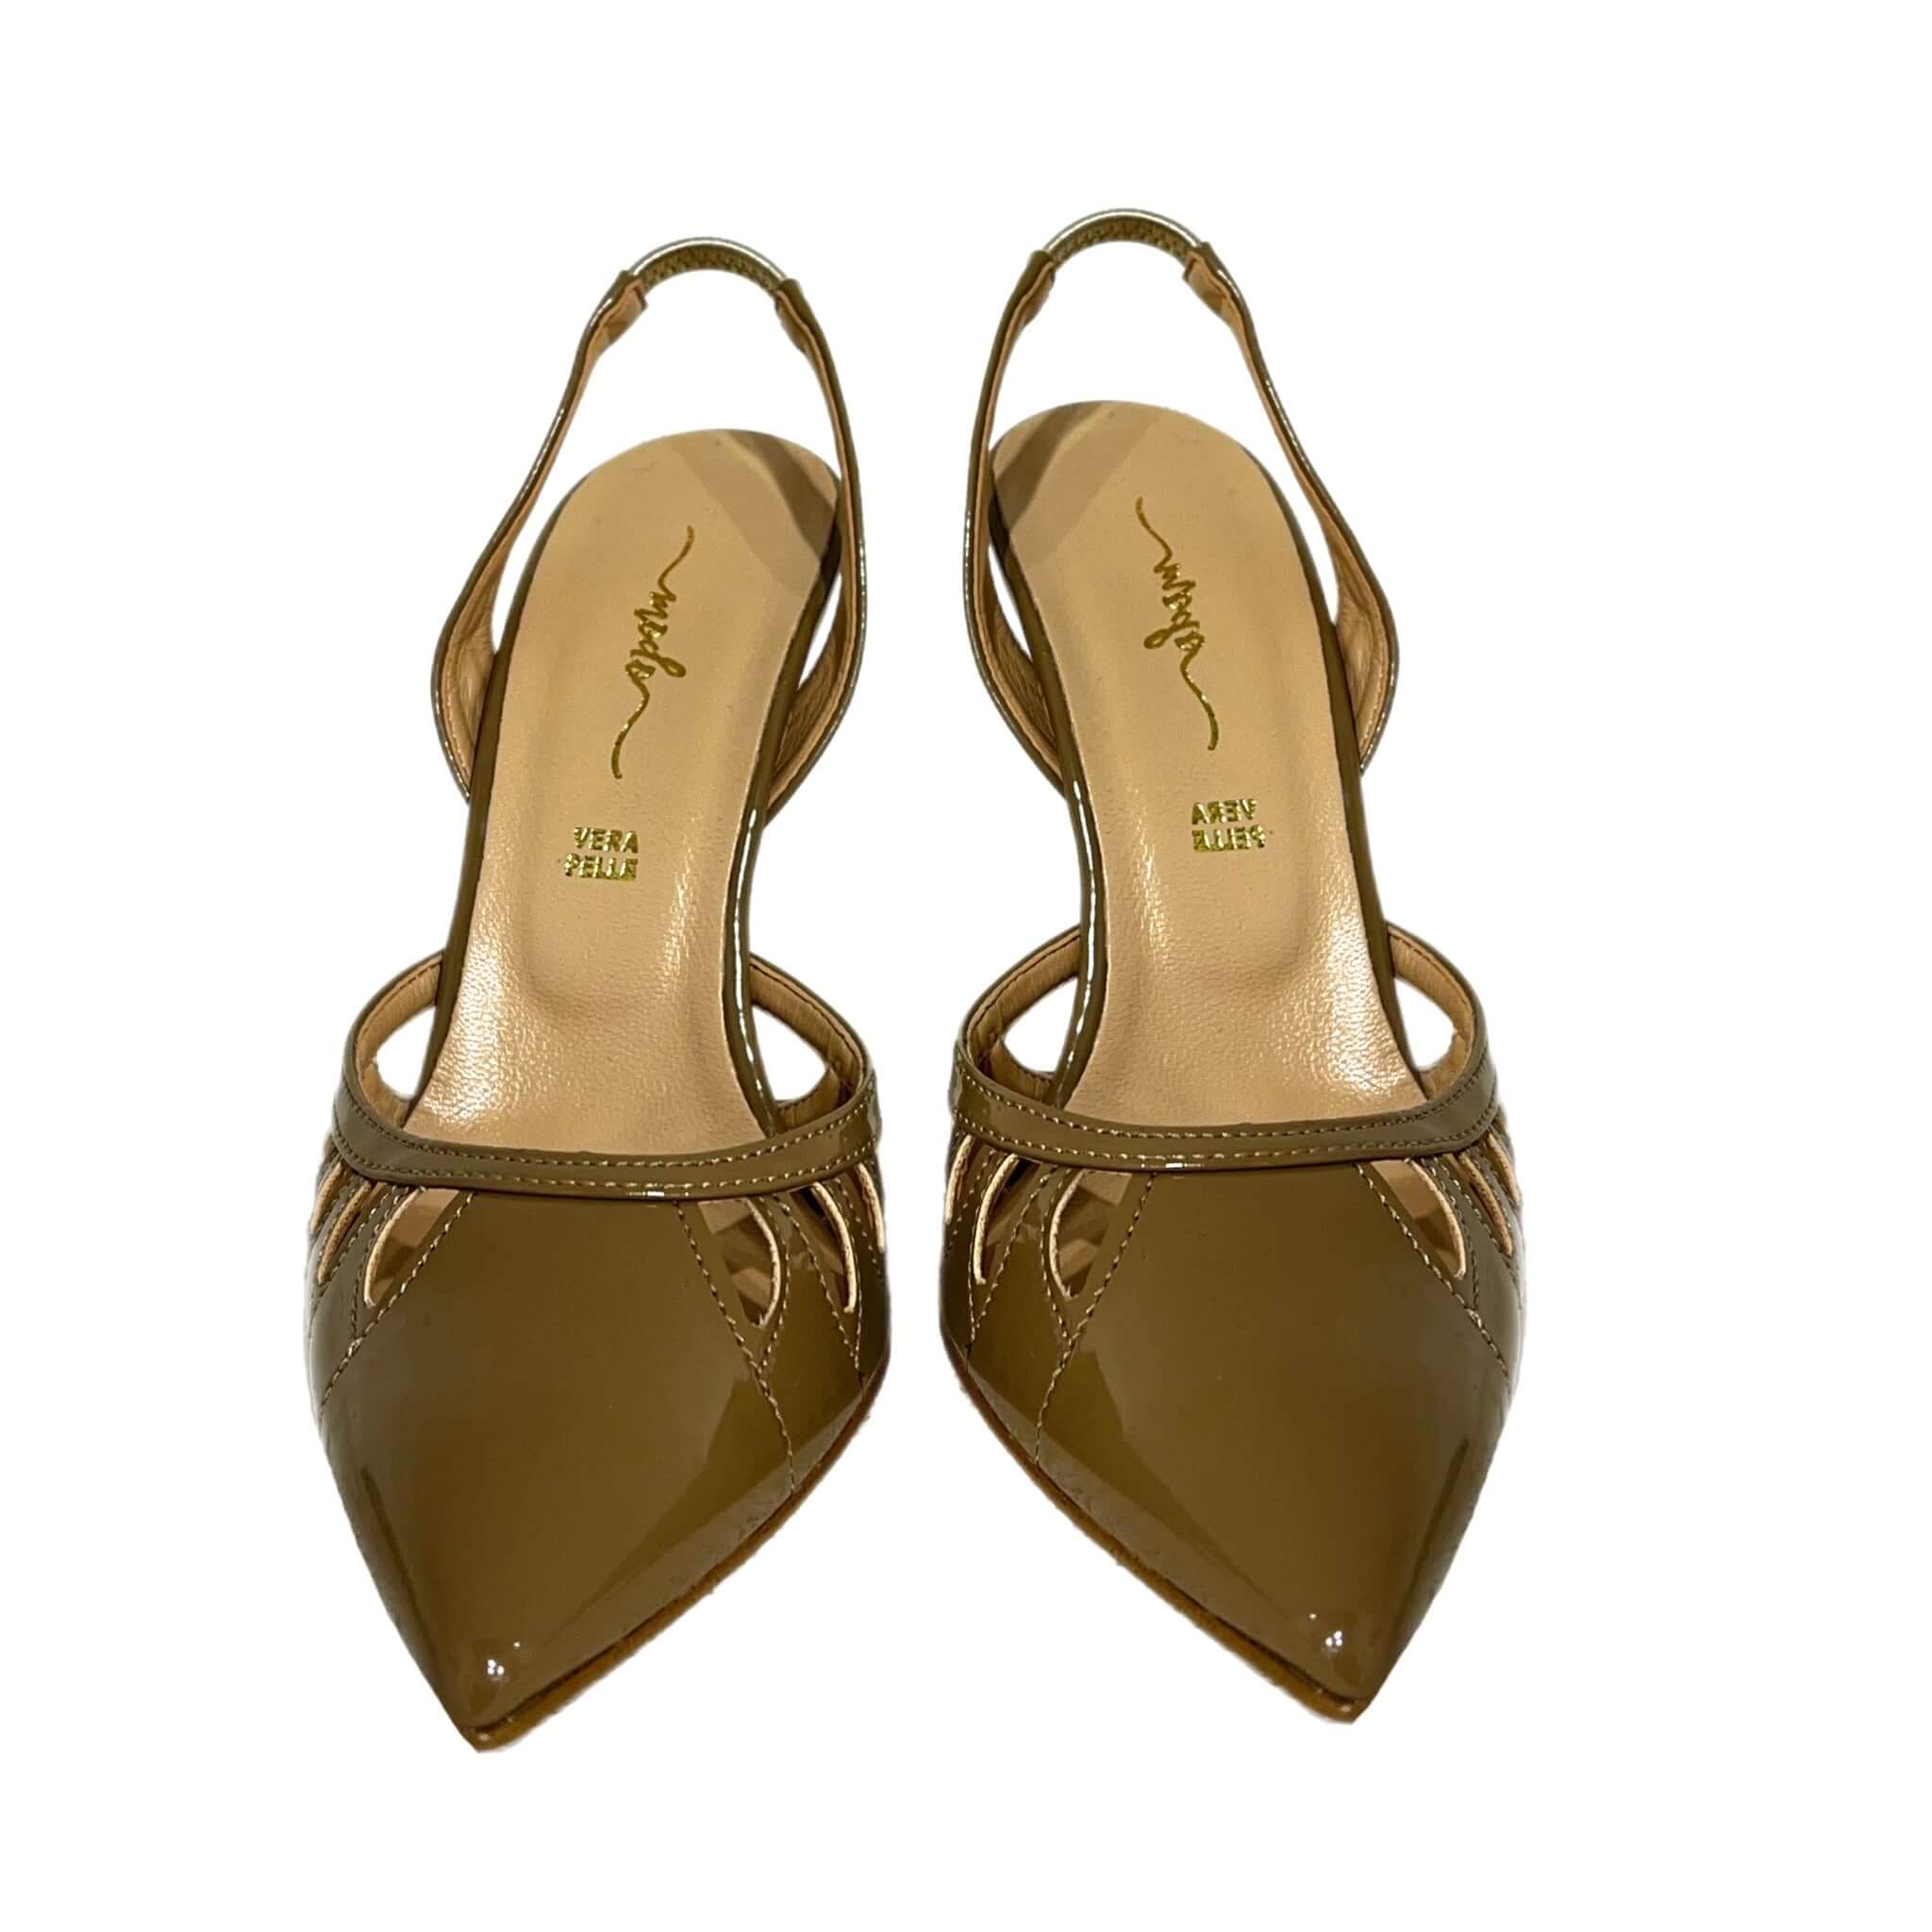 Patent leather slingback